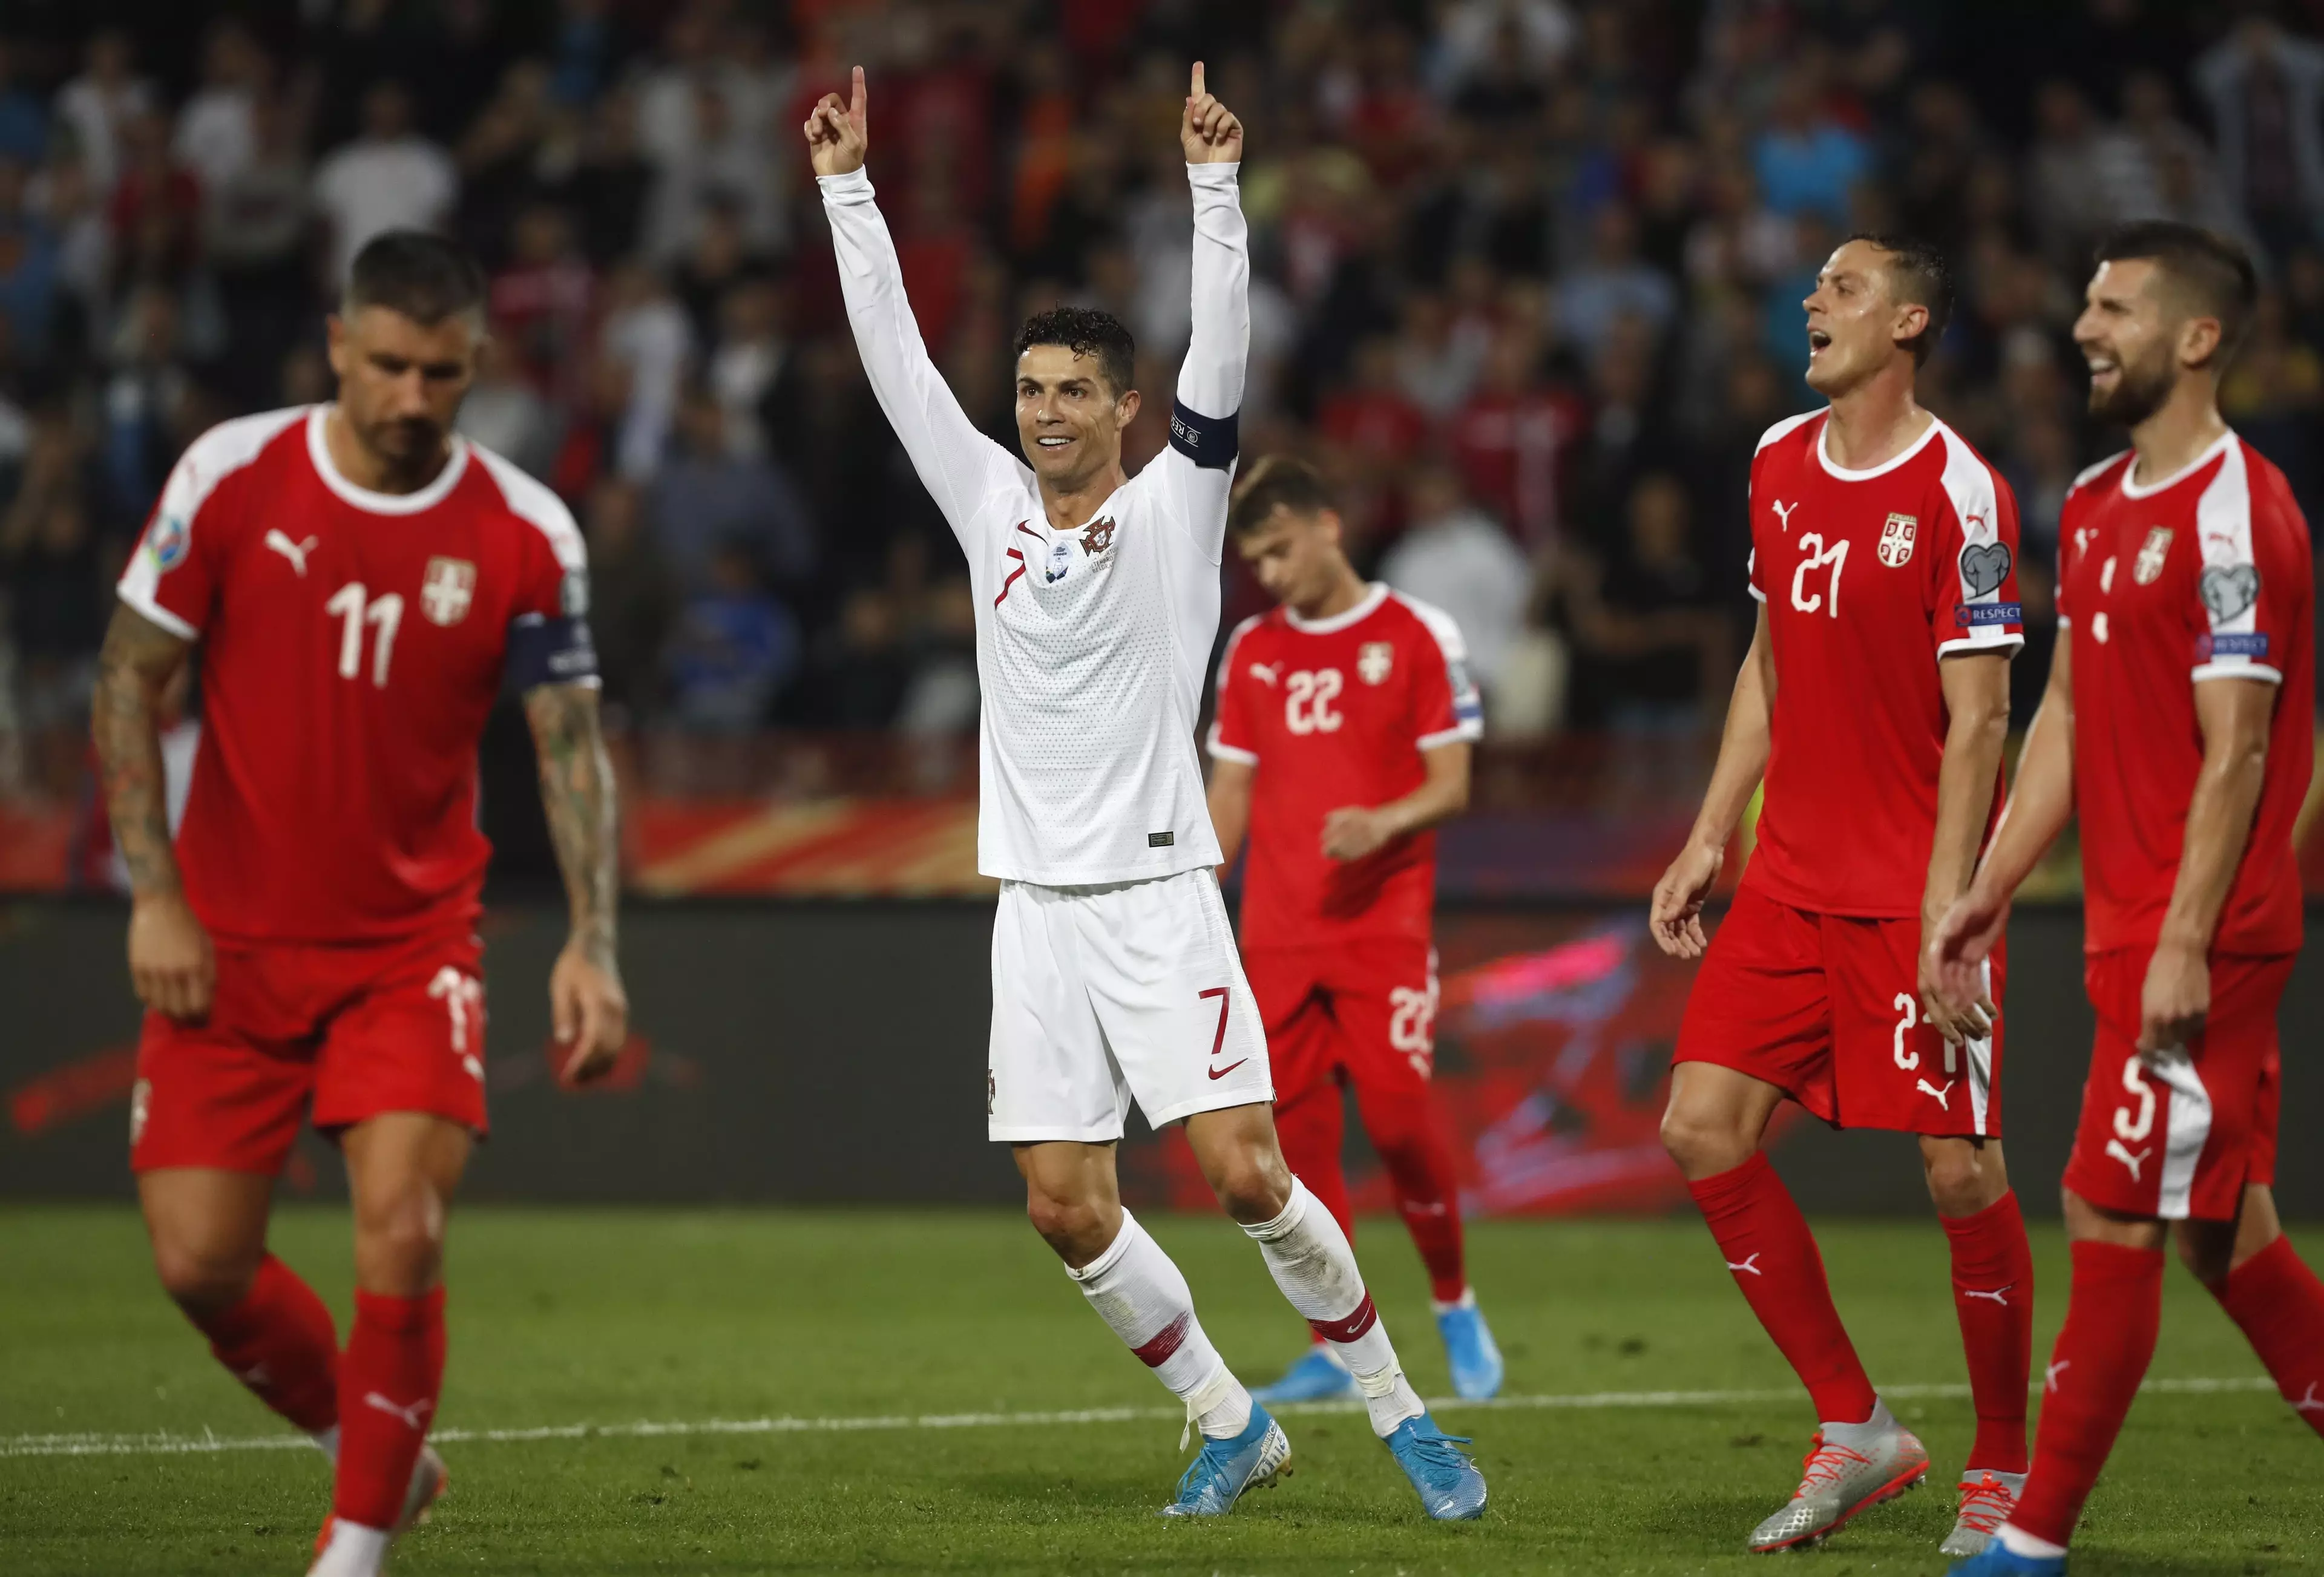 Ronaldo also scored against Serbia last week. Image: PA Images